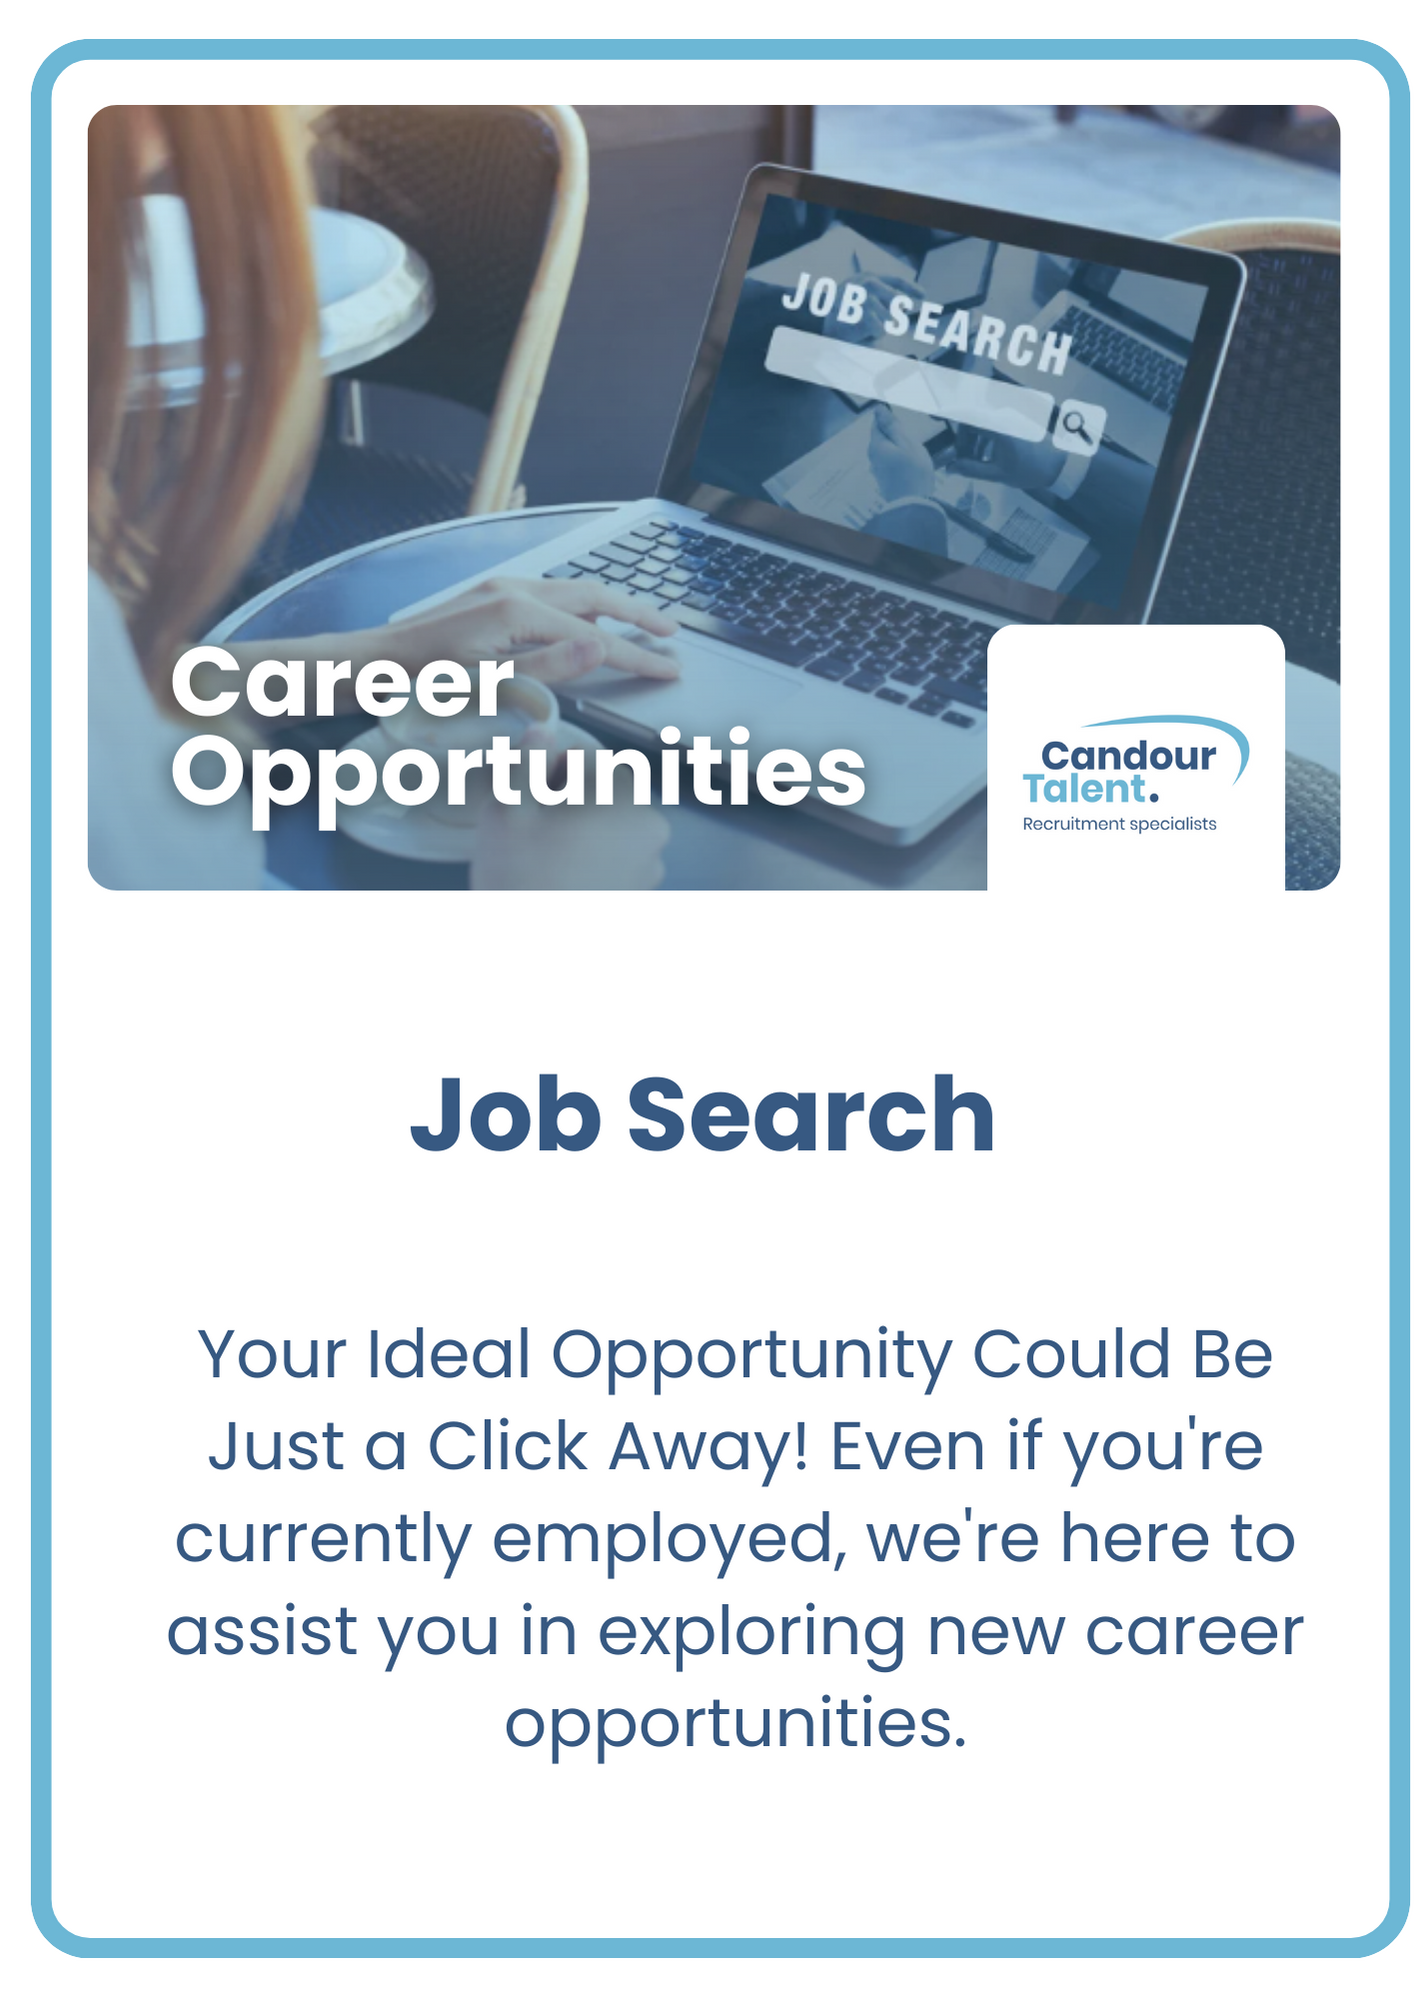 Candour Talent Recruitment Agency - Candidate Page. Image of 'Career Opportunities.' The image presents a laptop illustrating a job search search bar with the text 'Your Ideal Opportunity Could Be Just a Click Away!' Even if you're currently employed, we're here to assist you in exploring new career opportunities.